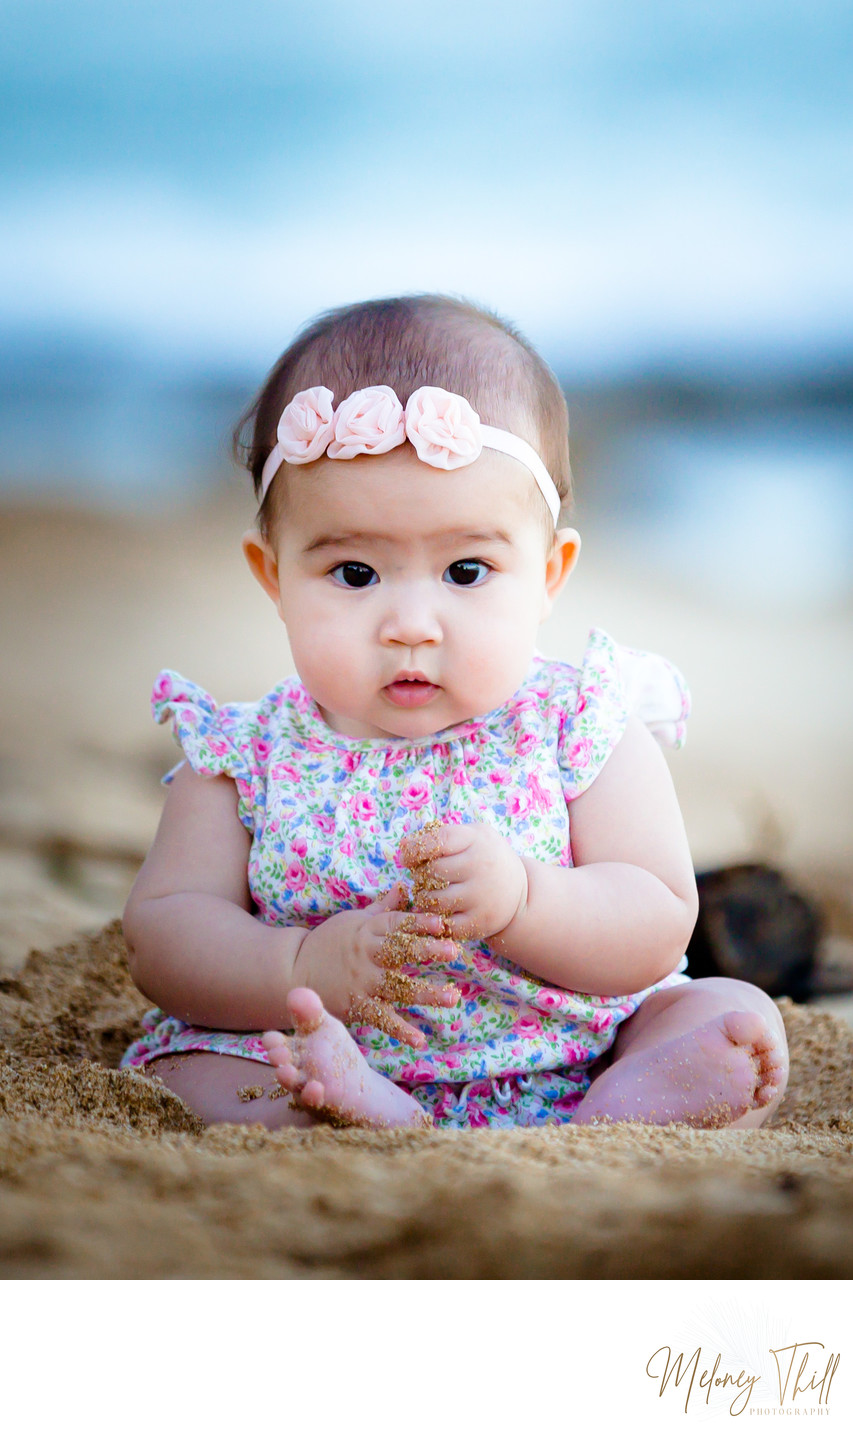 1 year old playing in the sand